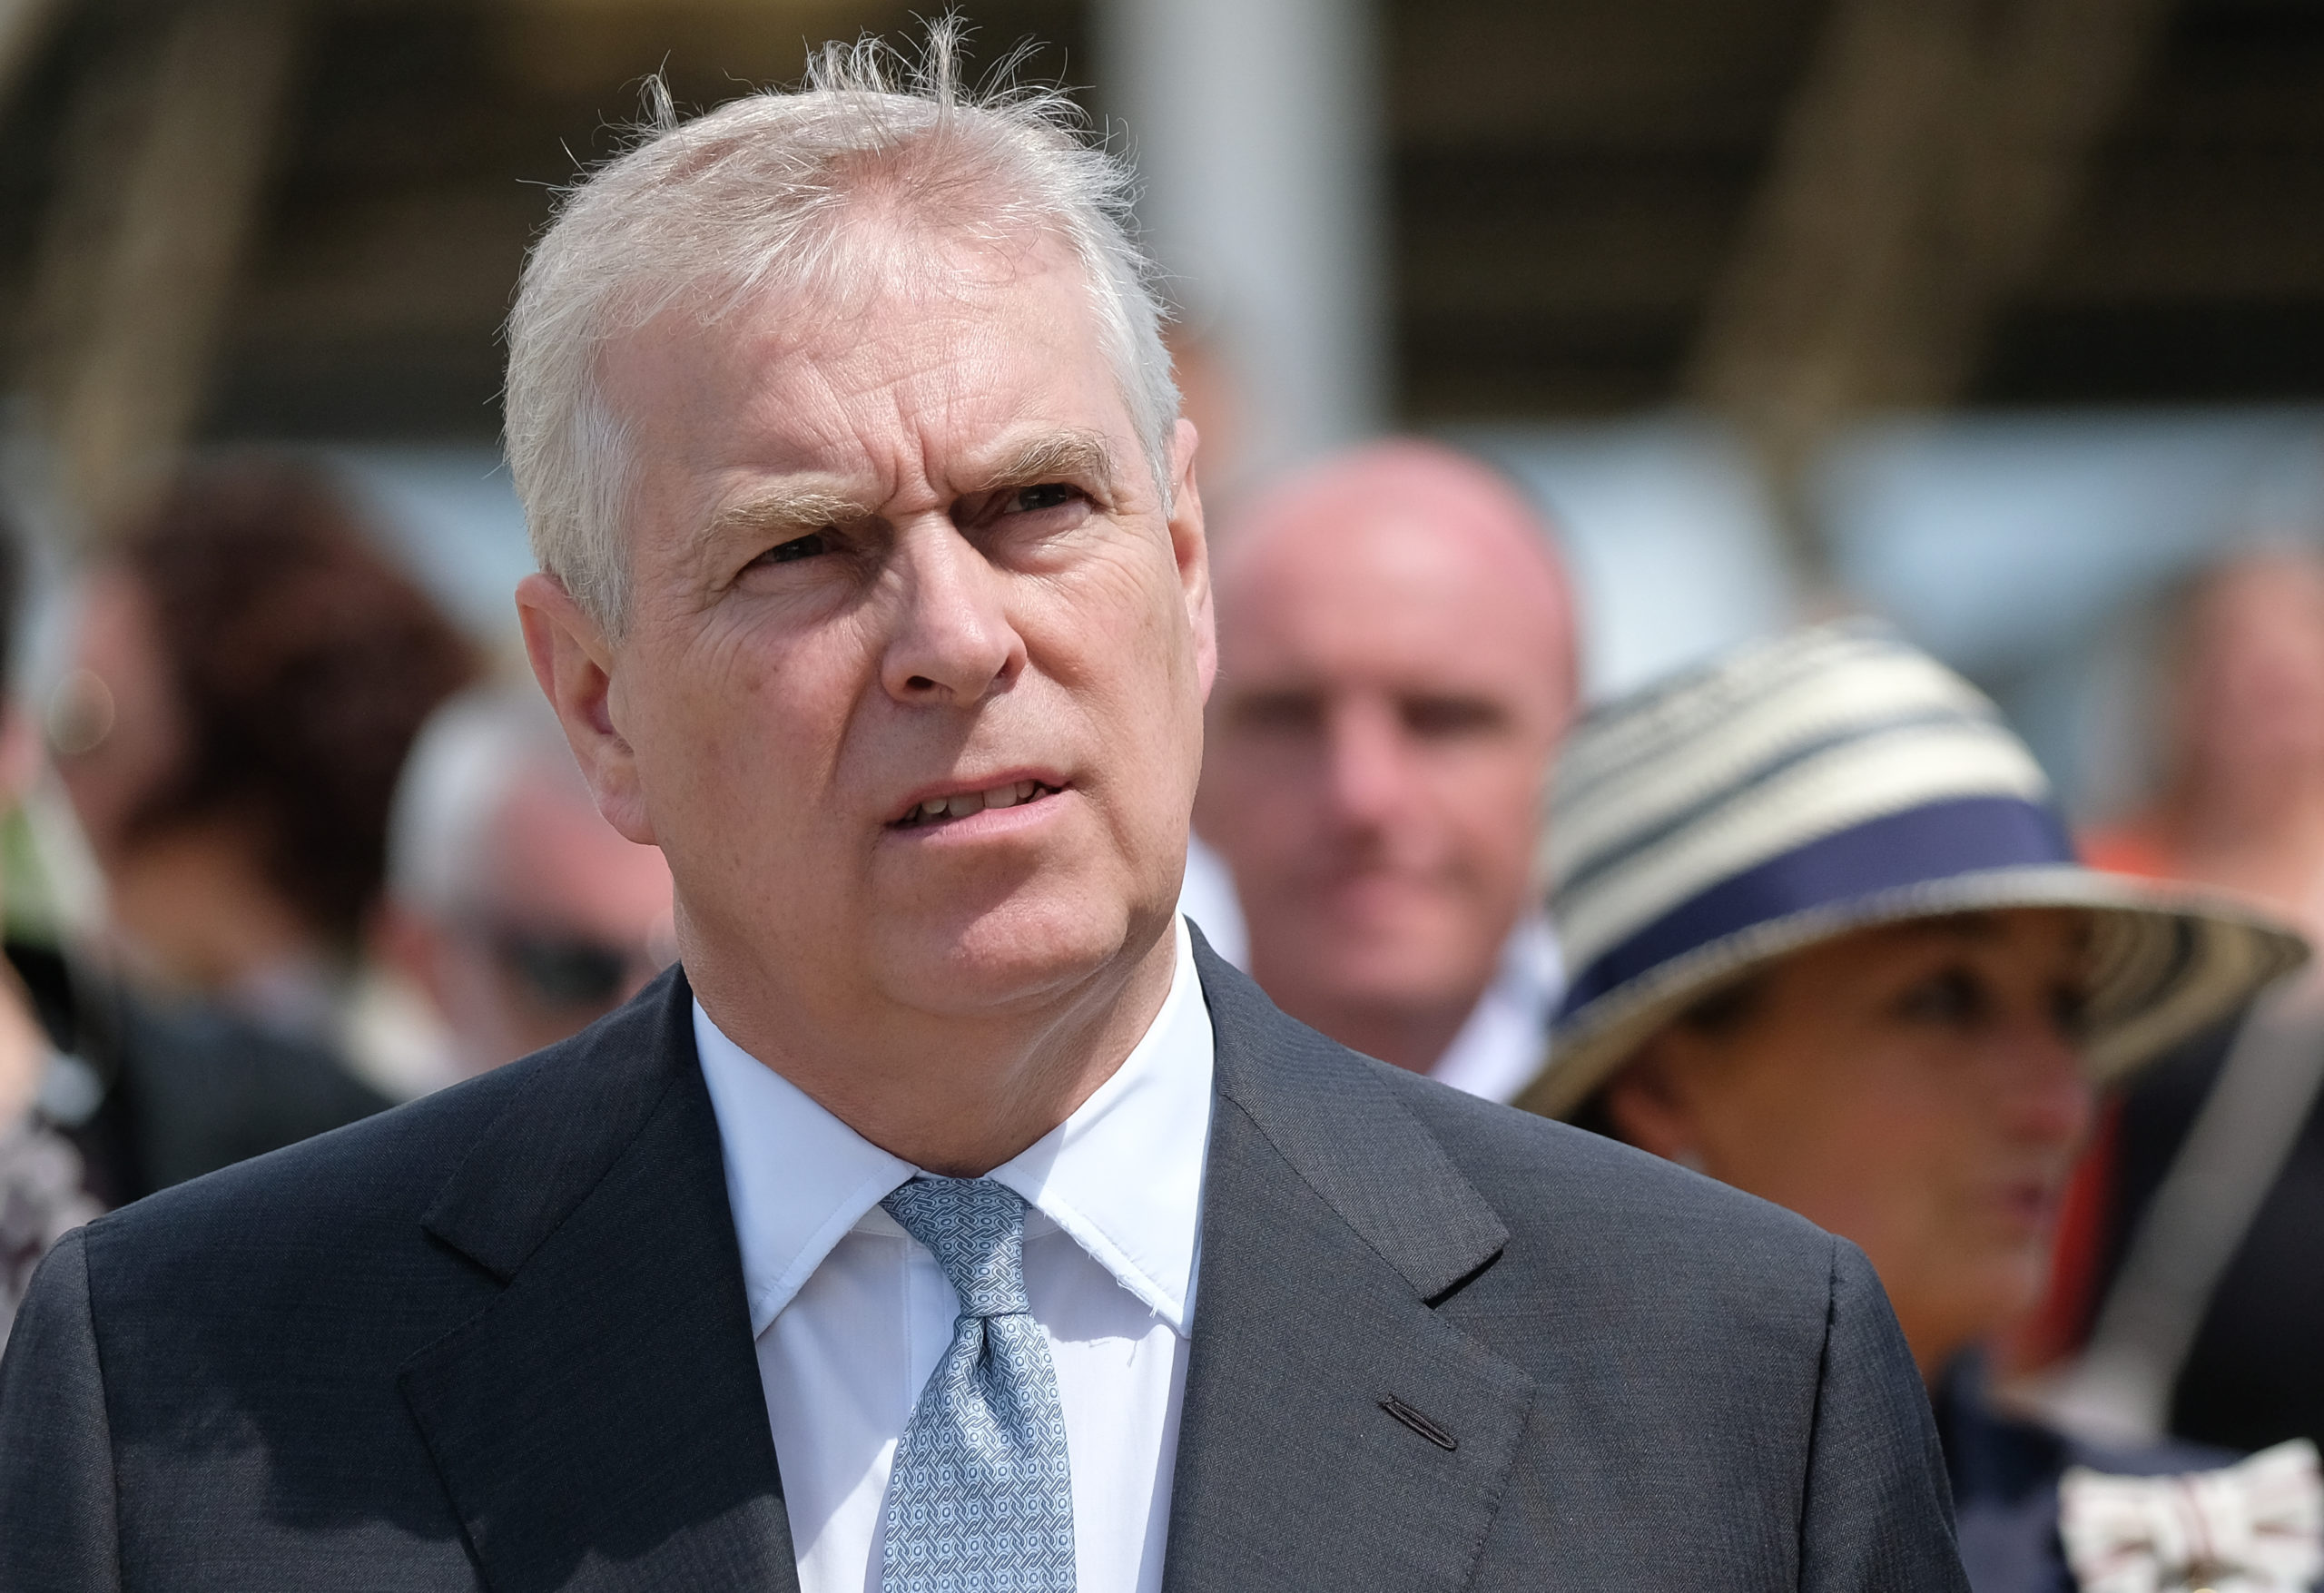 HARROGATE, ENGLAND - JULY 11: HRH Prince Andrew, Duke of York visits the Showground on the final day of the 161st Great Yorkshire Show on July 11, 2019 in Harrogate, England. Organiser’s of the show this year have revealed that overall entries for the three-day show are higher than in any previous years. The Great Yorkshire Show is England’s premier agricultural event and is organised by the Yorkshire Agricultural Society. The YAS support and promotes the farming industry through health care, business, education and funding scientific research into rural affairs. First held in 1838 the show brings together agricultural displays, livestock events, farming demonstrations, food, dairy and produce stands as well as equestrian events. The popular agricultural show is held over three days and celebrates the farming and agricultural community and their way of life. (Photo by Ian Forsyth/Getty Images)